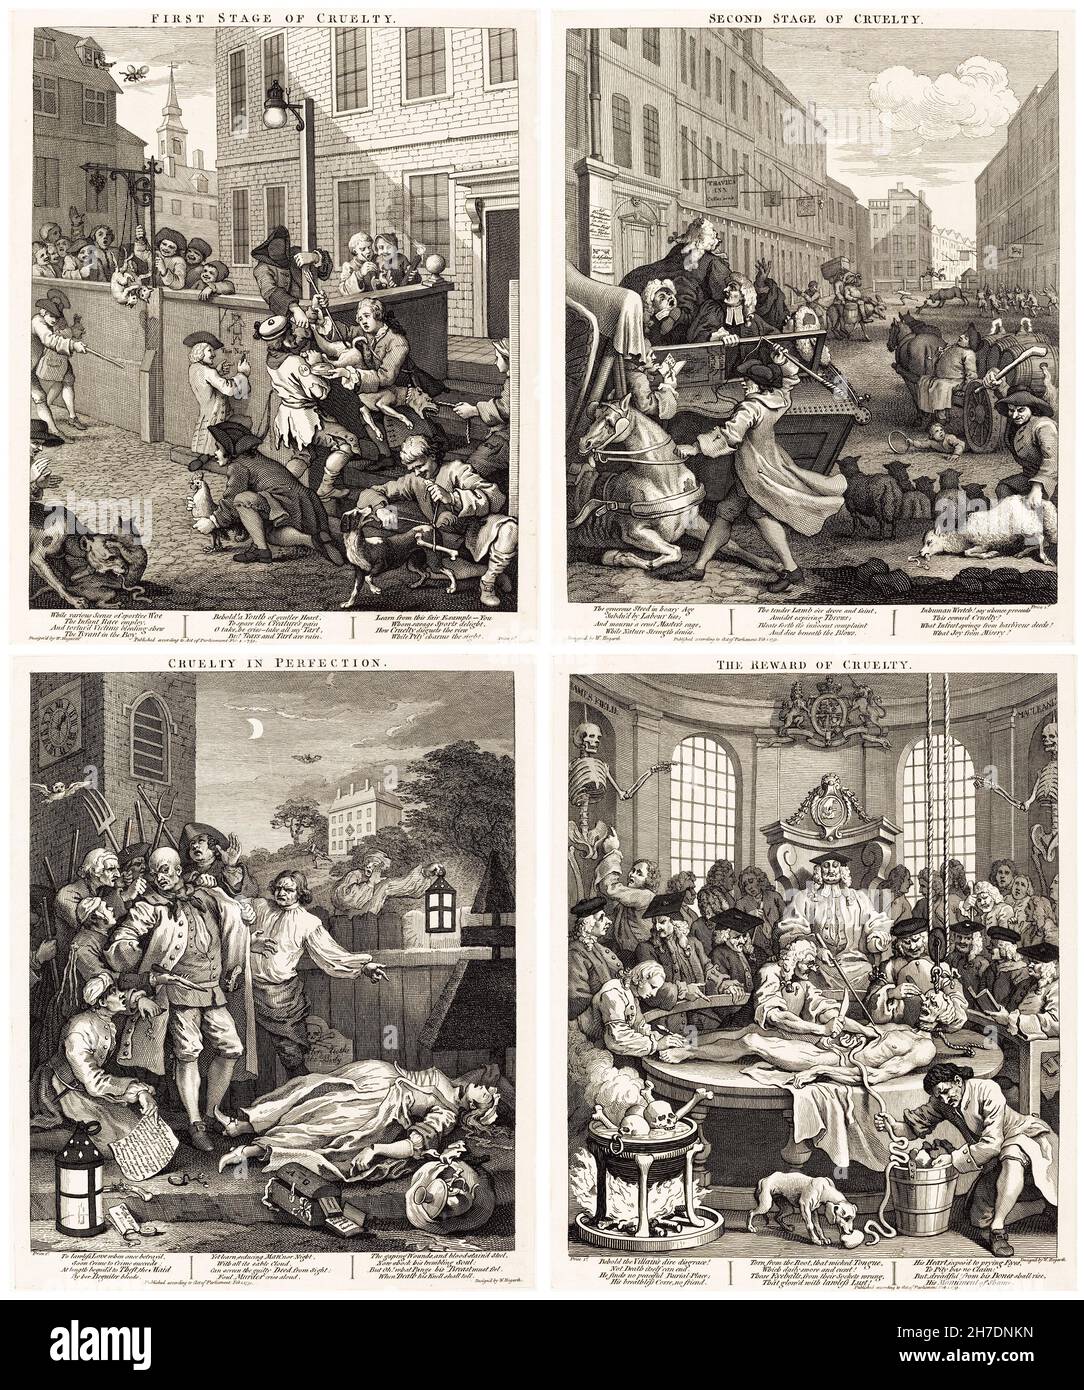 The Four Stages of Cruelty, engraving by William Hogarth, 1751 Stock Photo